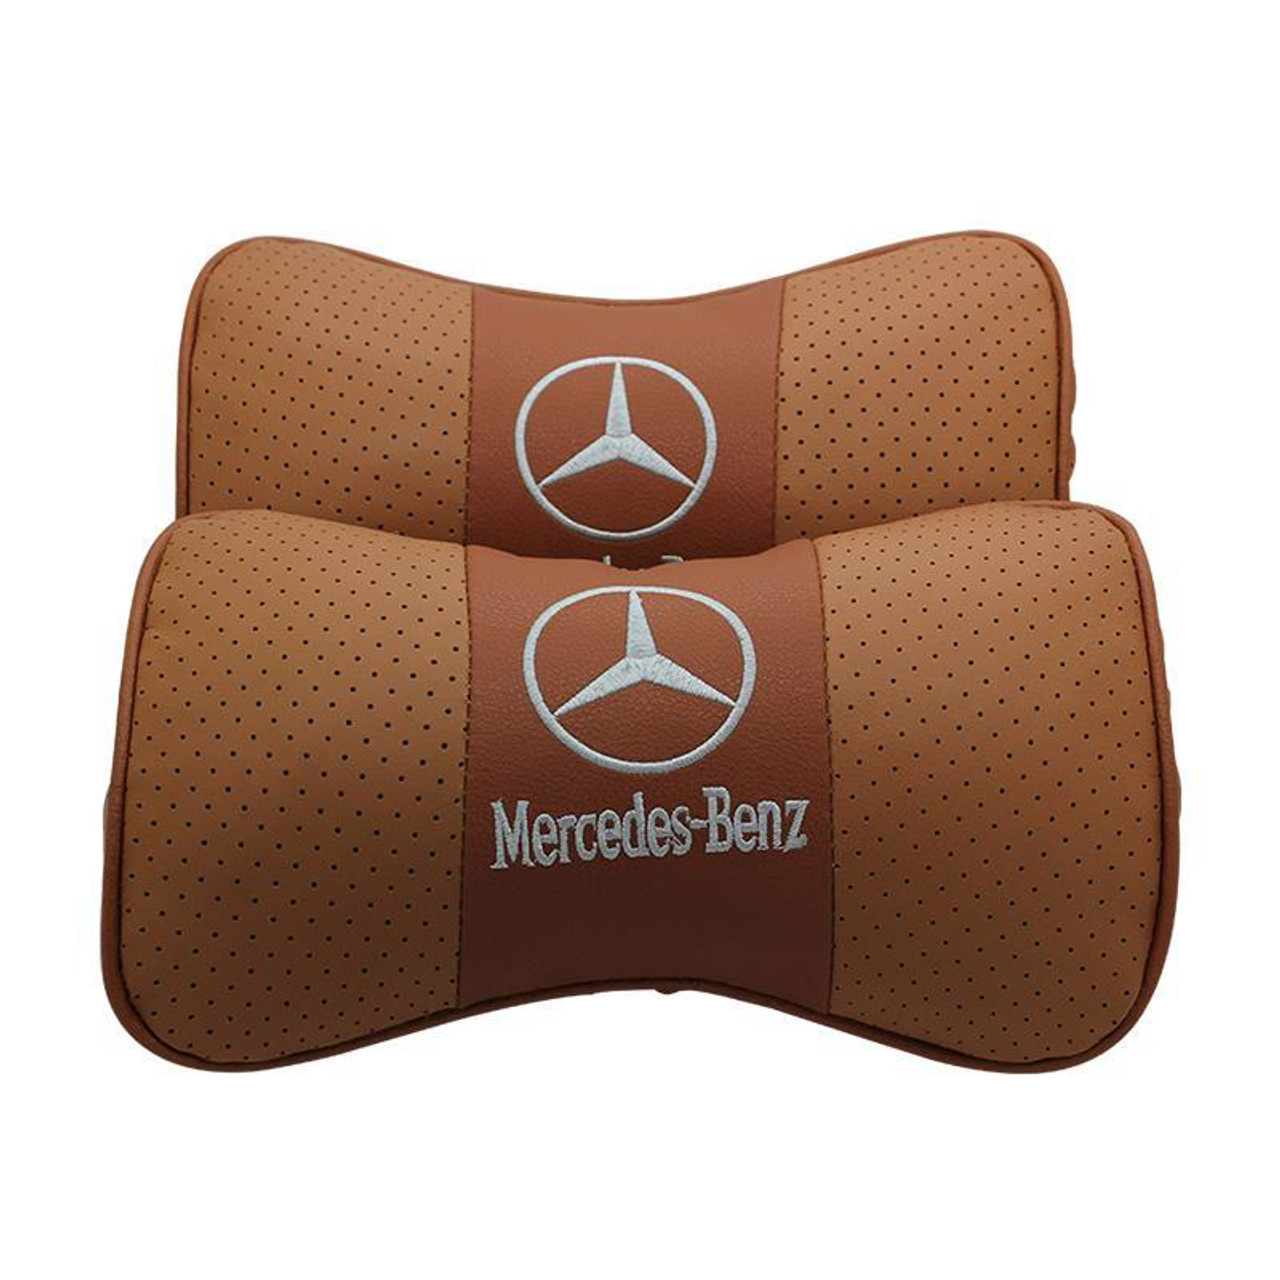 2pcs Mercedes-Benz Leather Headrest Pillows support for your neck & head